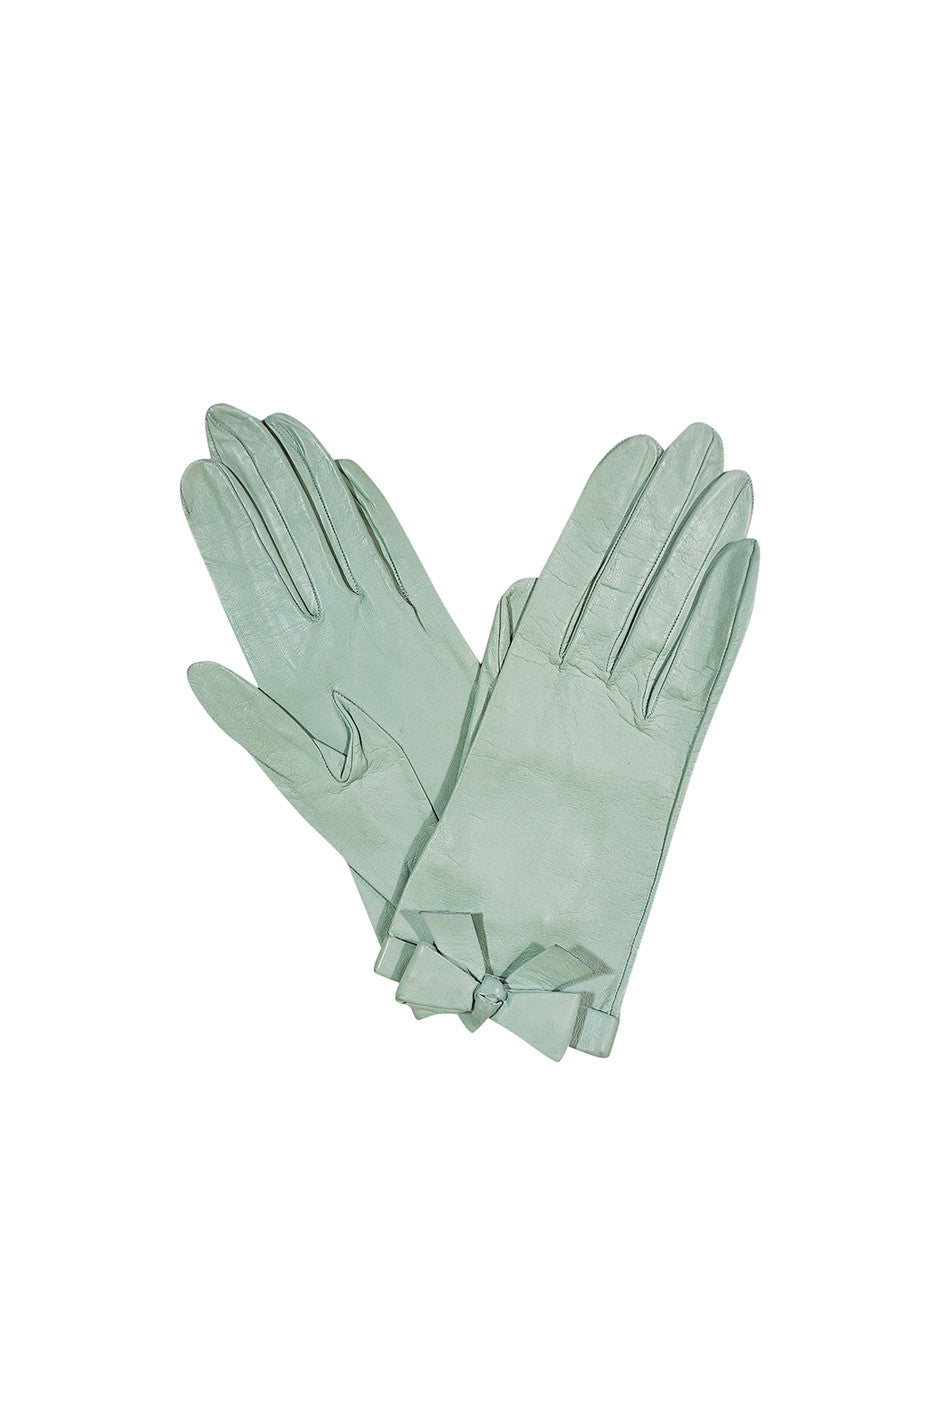 pale blue leather gloves